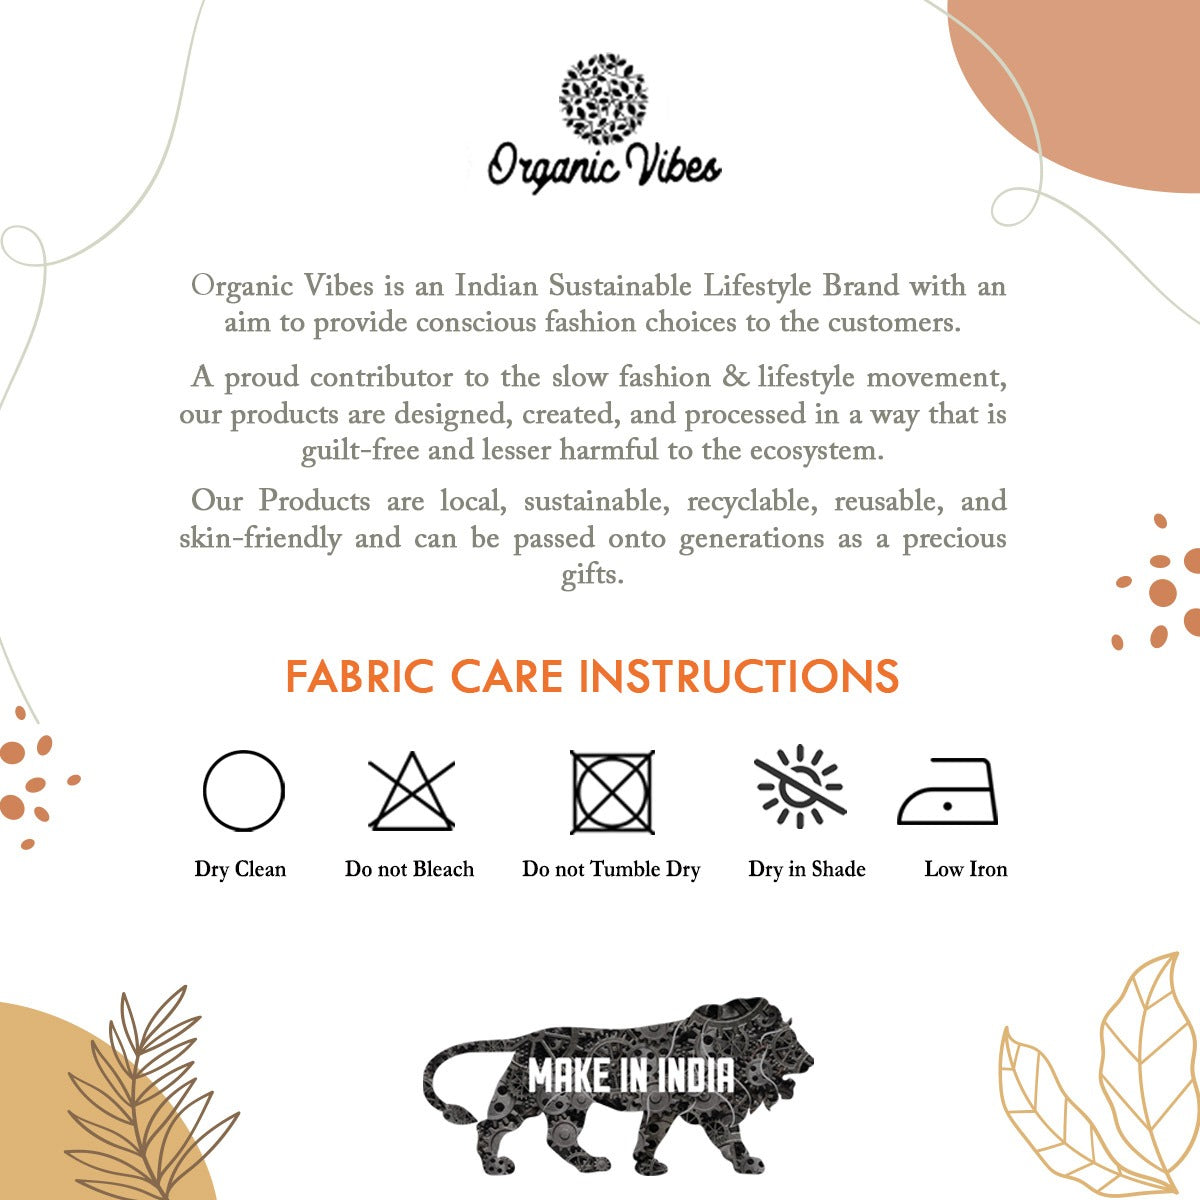 Organic Vibes Fabric Care Guide